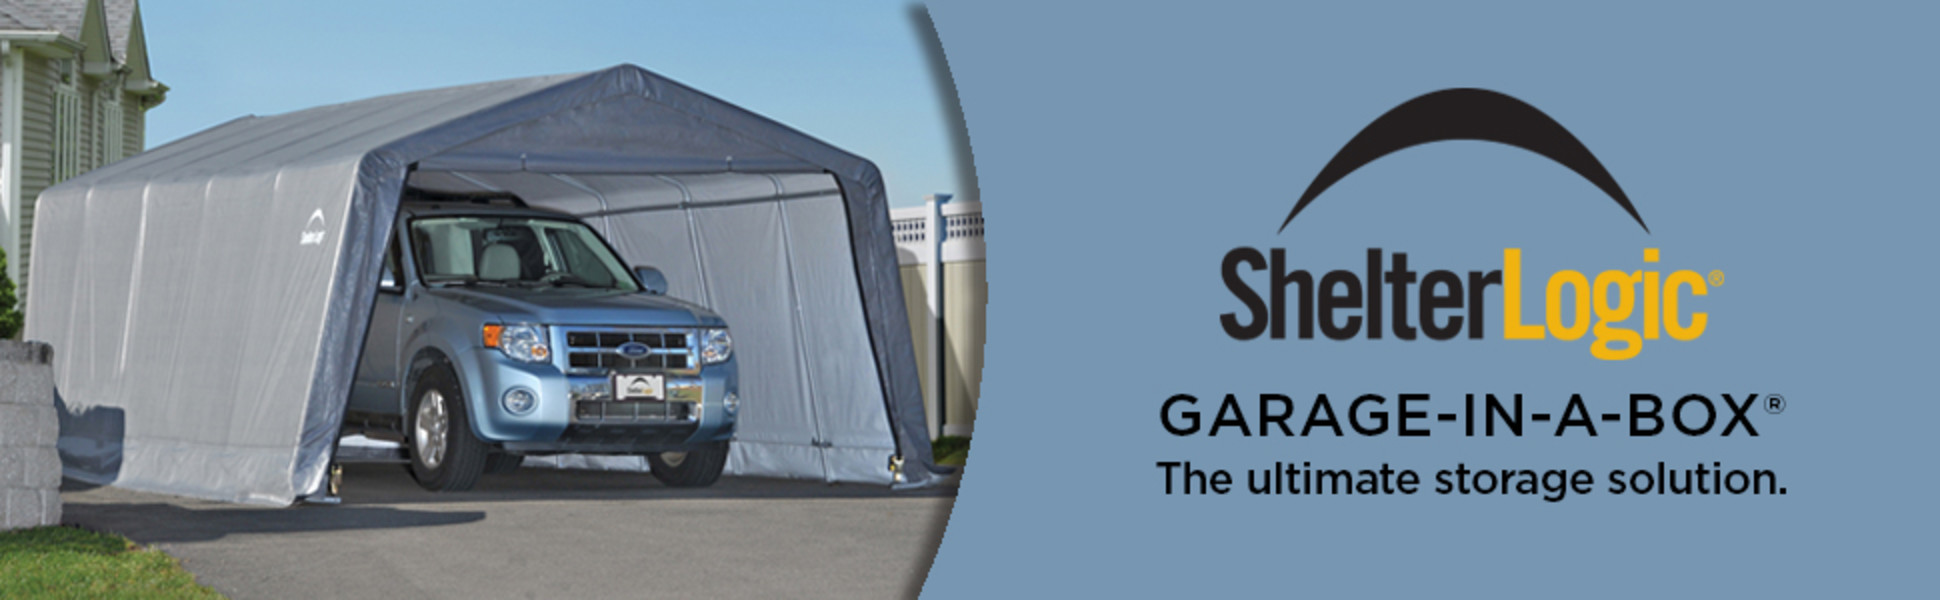 ShelterLogic GARAGE-IN-A-BOX The ultimate storage solution for full-size vehicles.